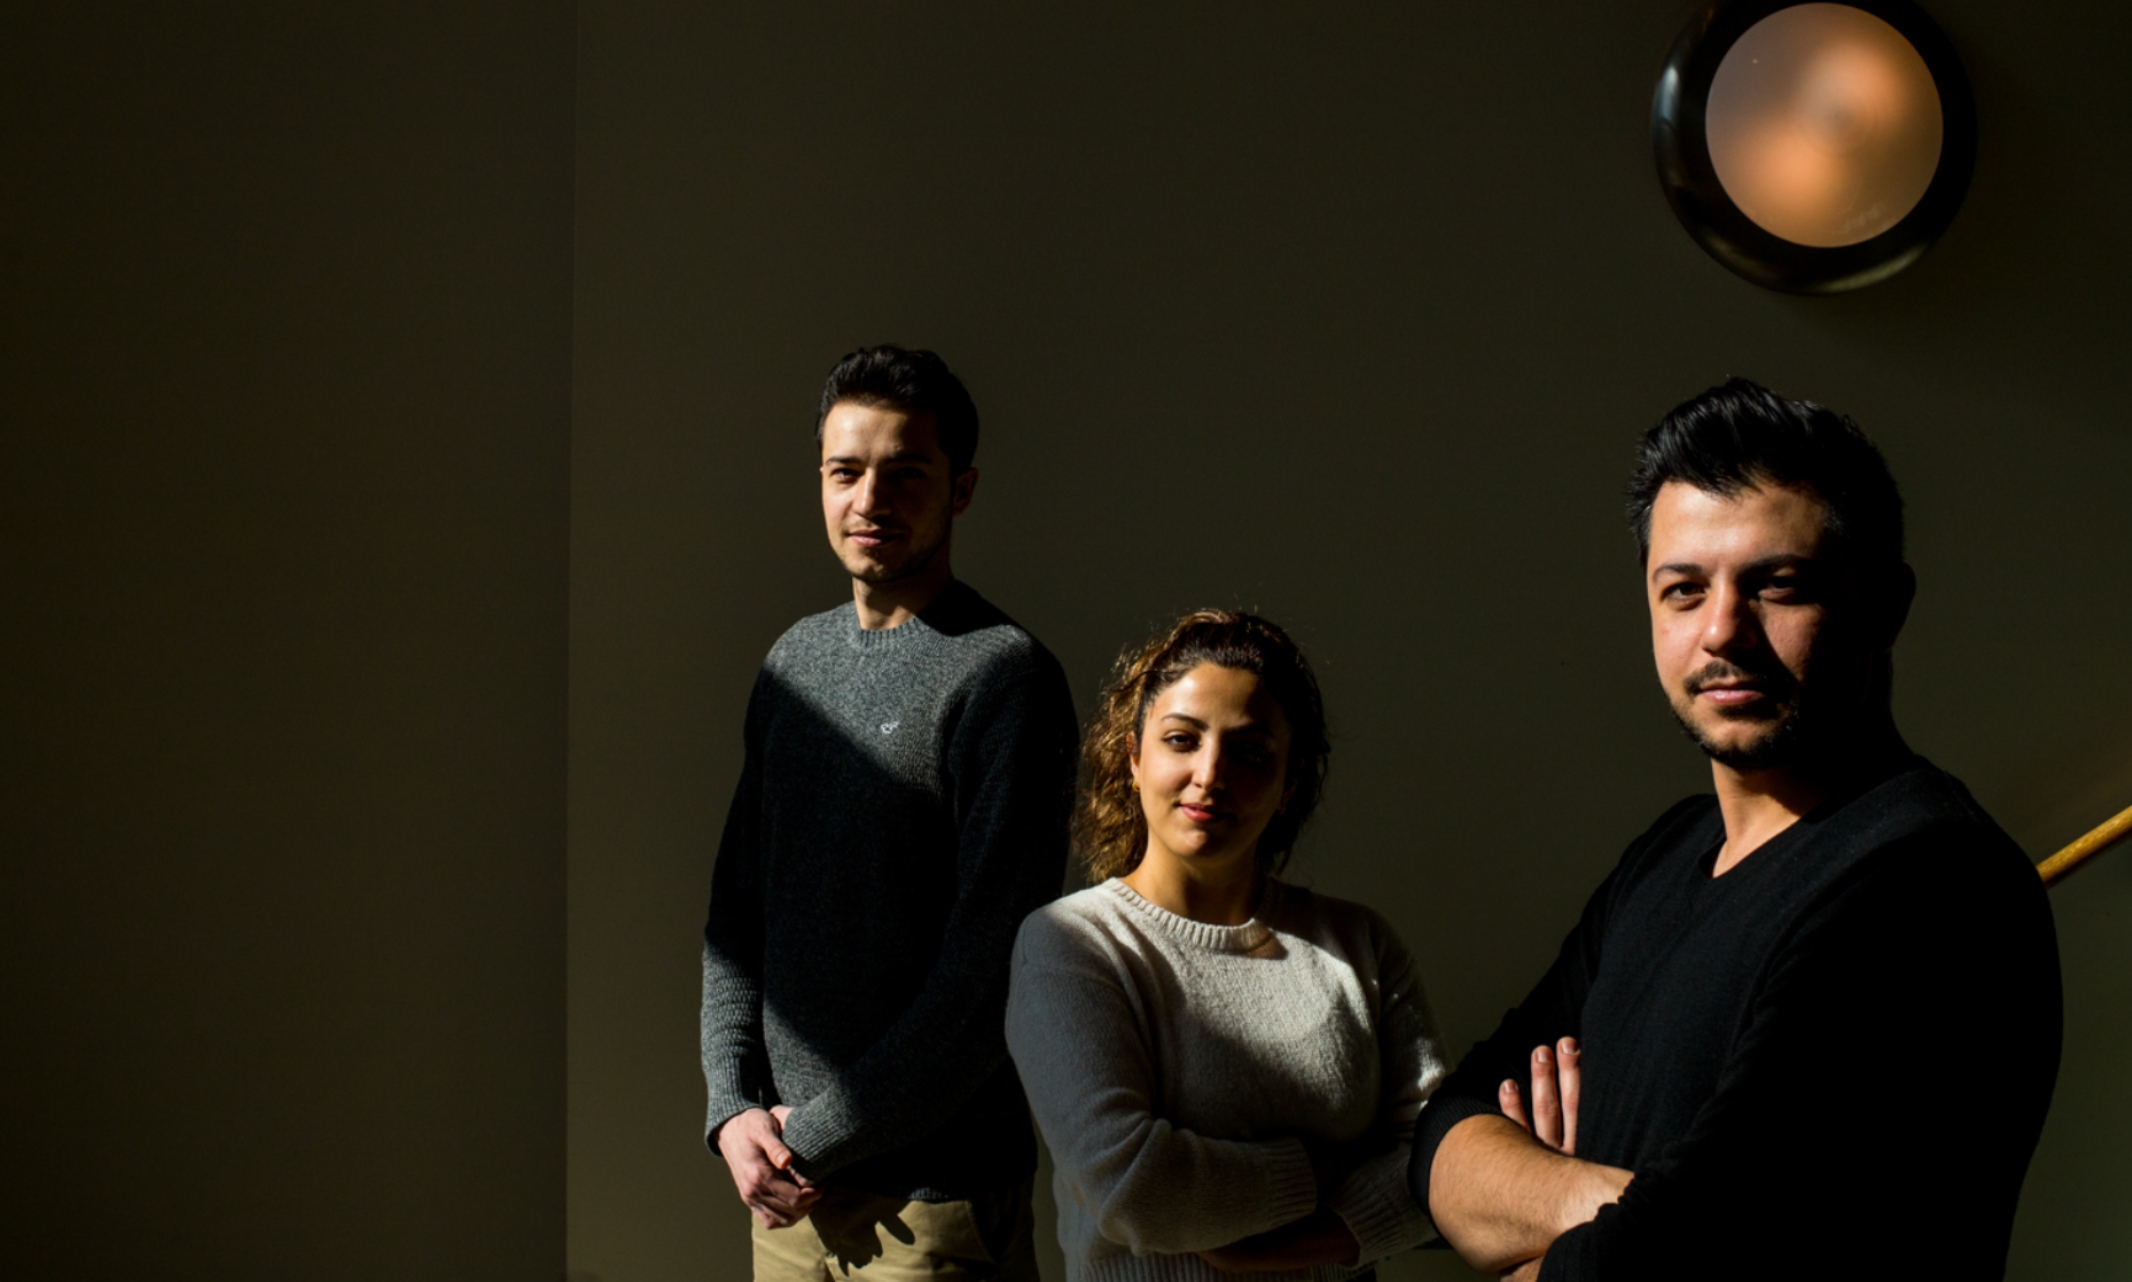 the team of Ph.D. students behind DeepLens